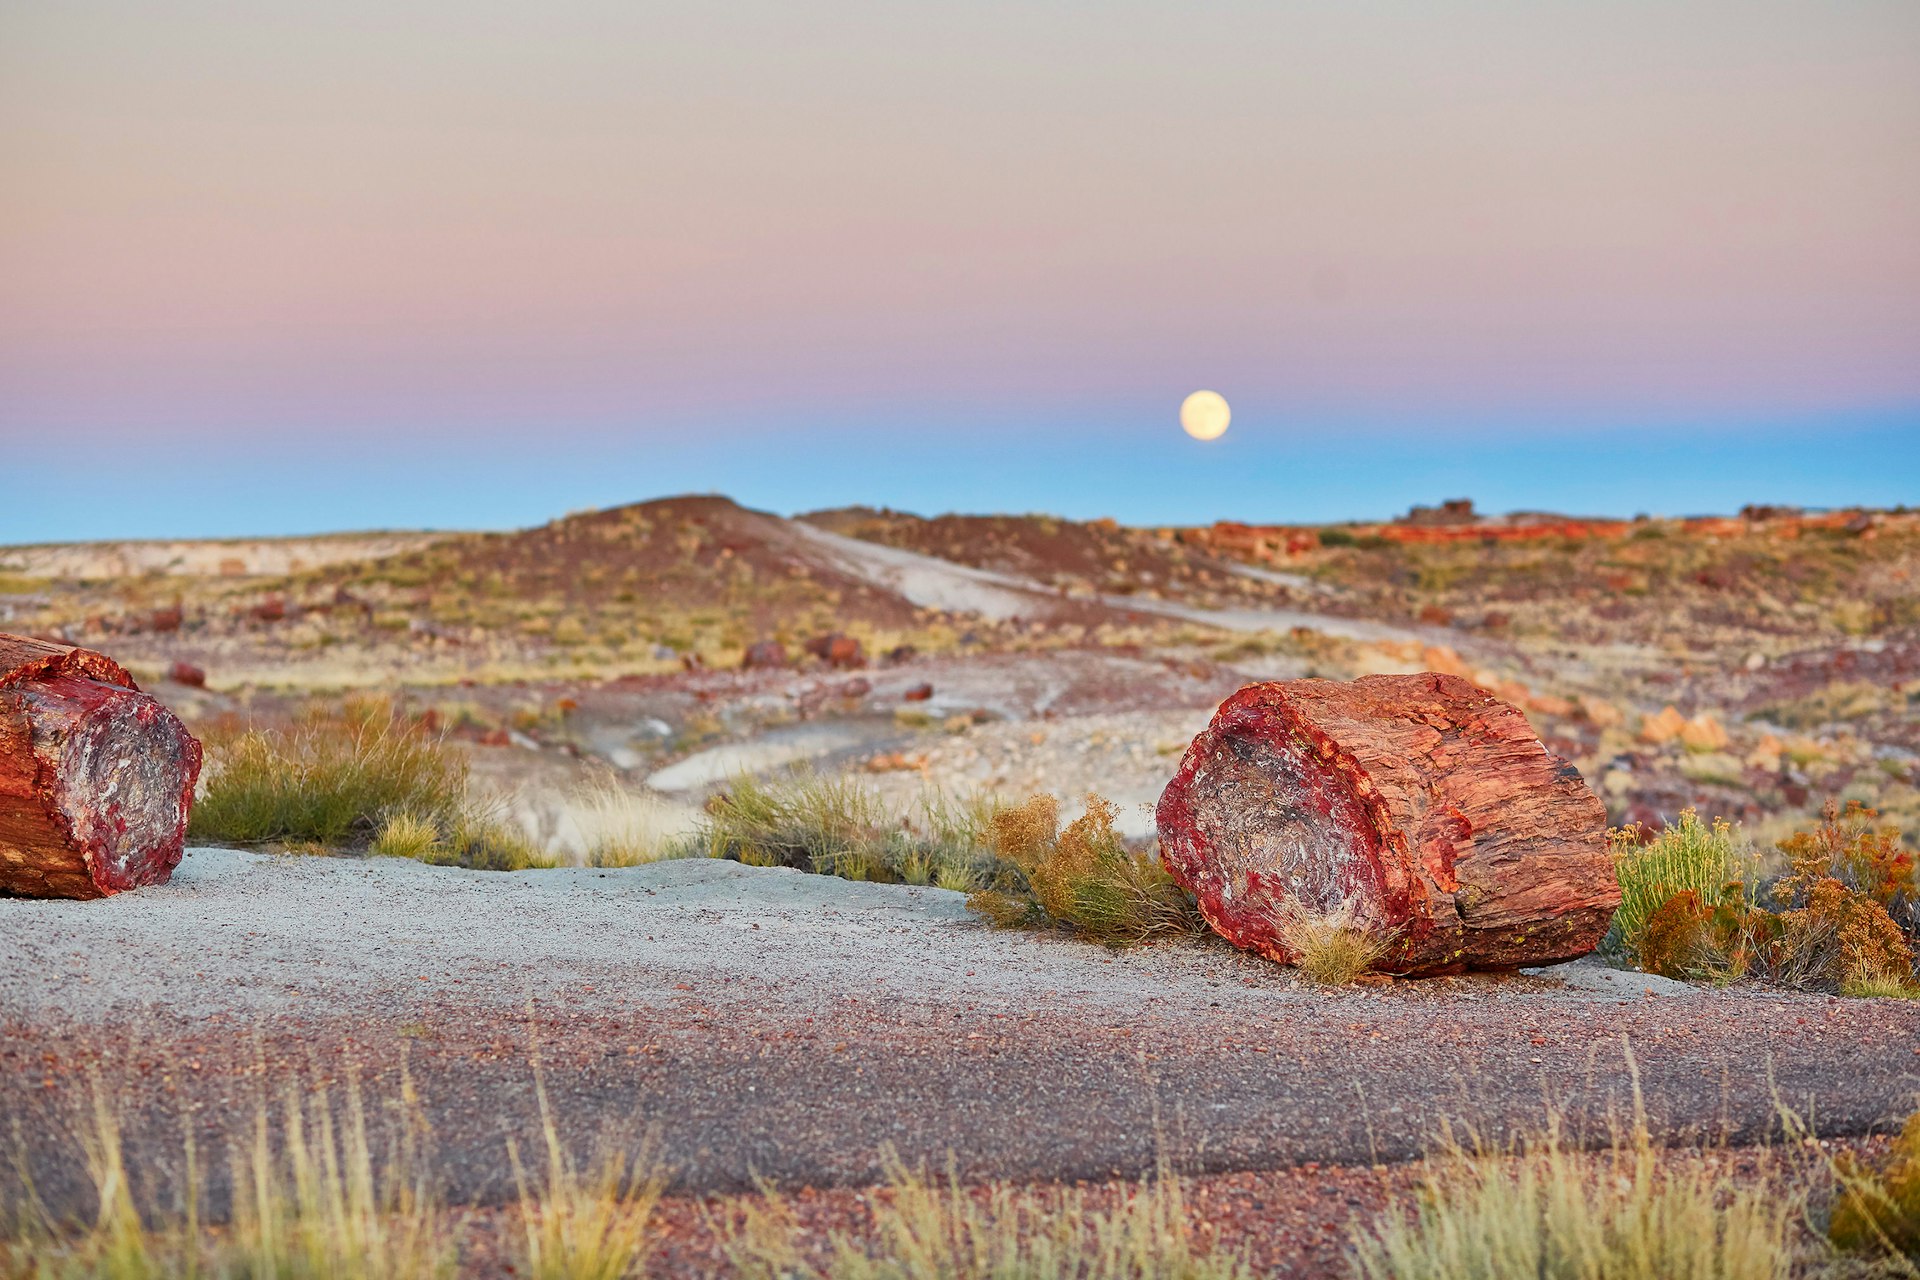 A petrified log in the middle of a desert landscape with the moon rising in a pink-hued sky